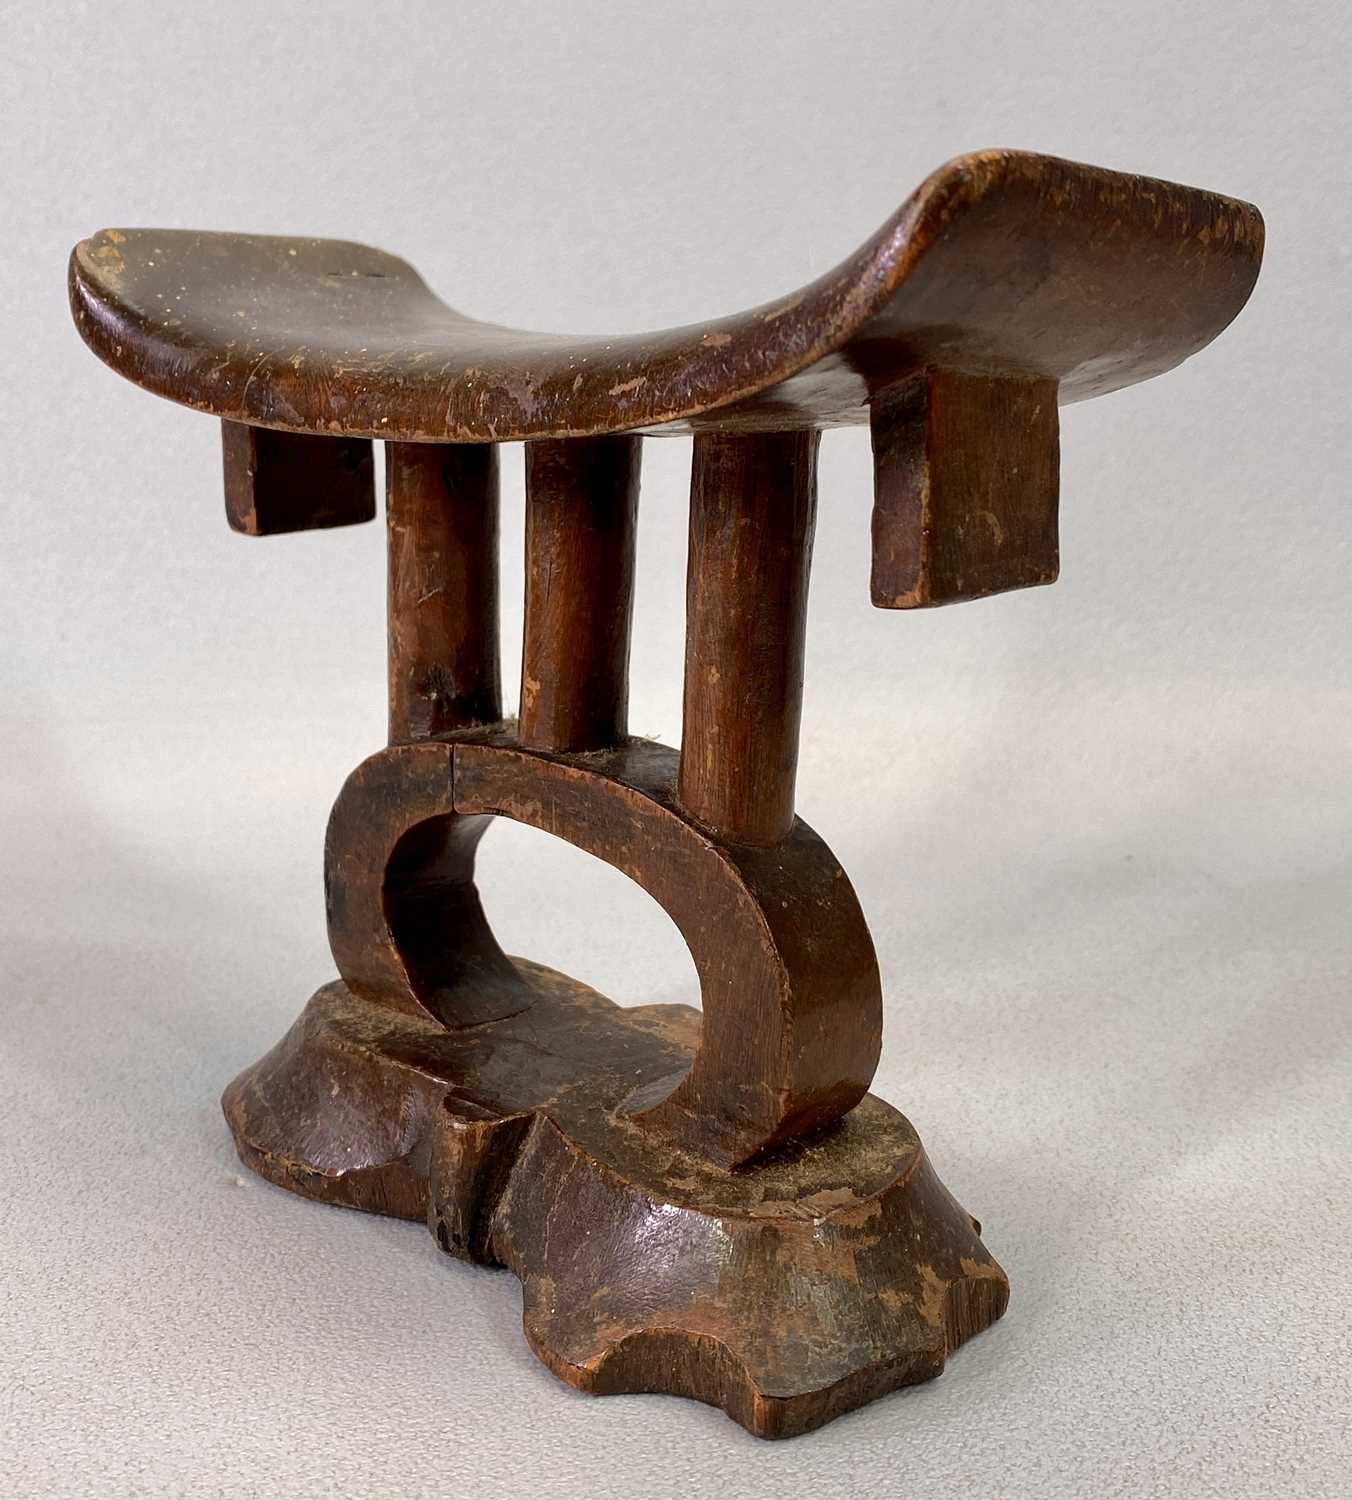 TSONGA HARDWOOD HEAD REST - curved top on a triple column with arched support to the spreading base, - Image 3 of 3